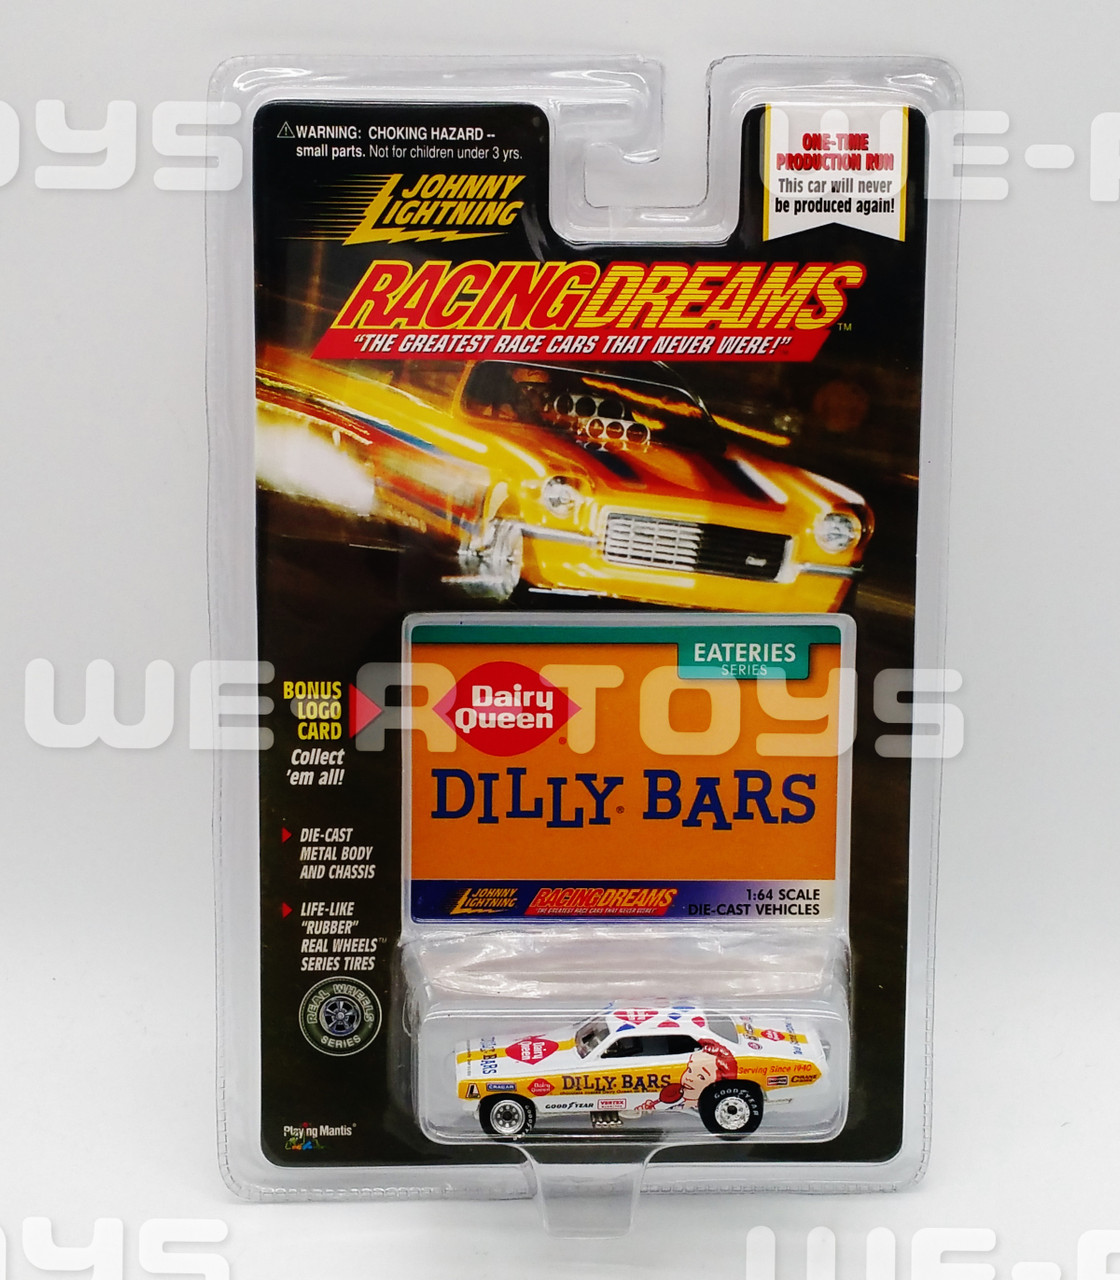 Johnny Lightning Racing Dreams Eateries Series Dairy Queen Dilly